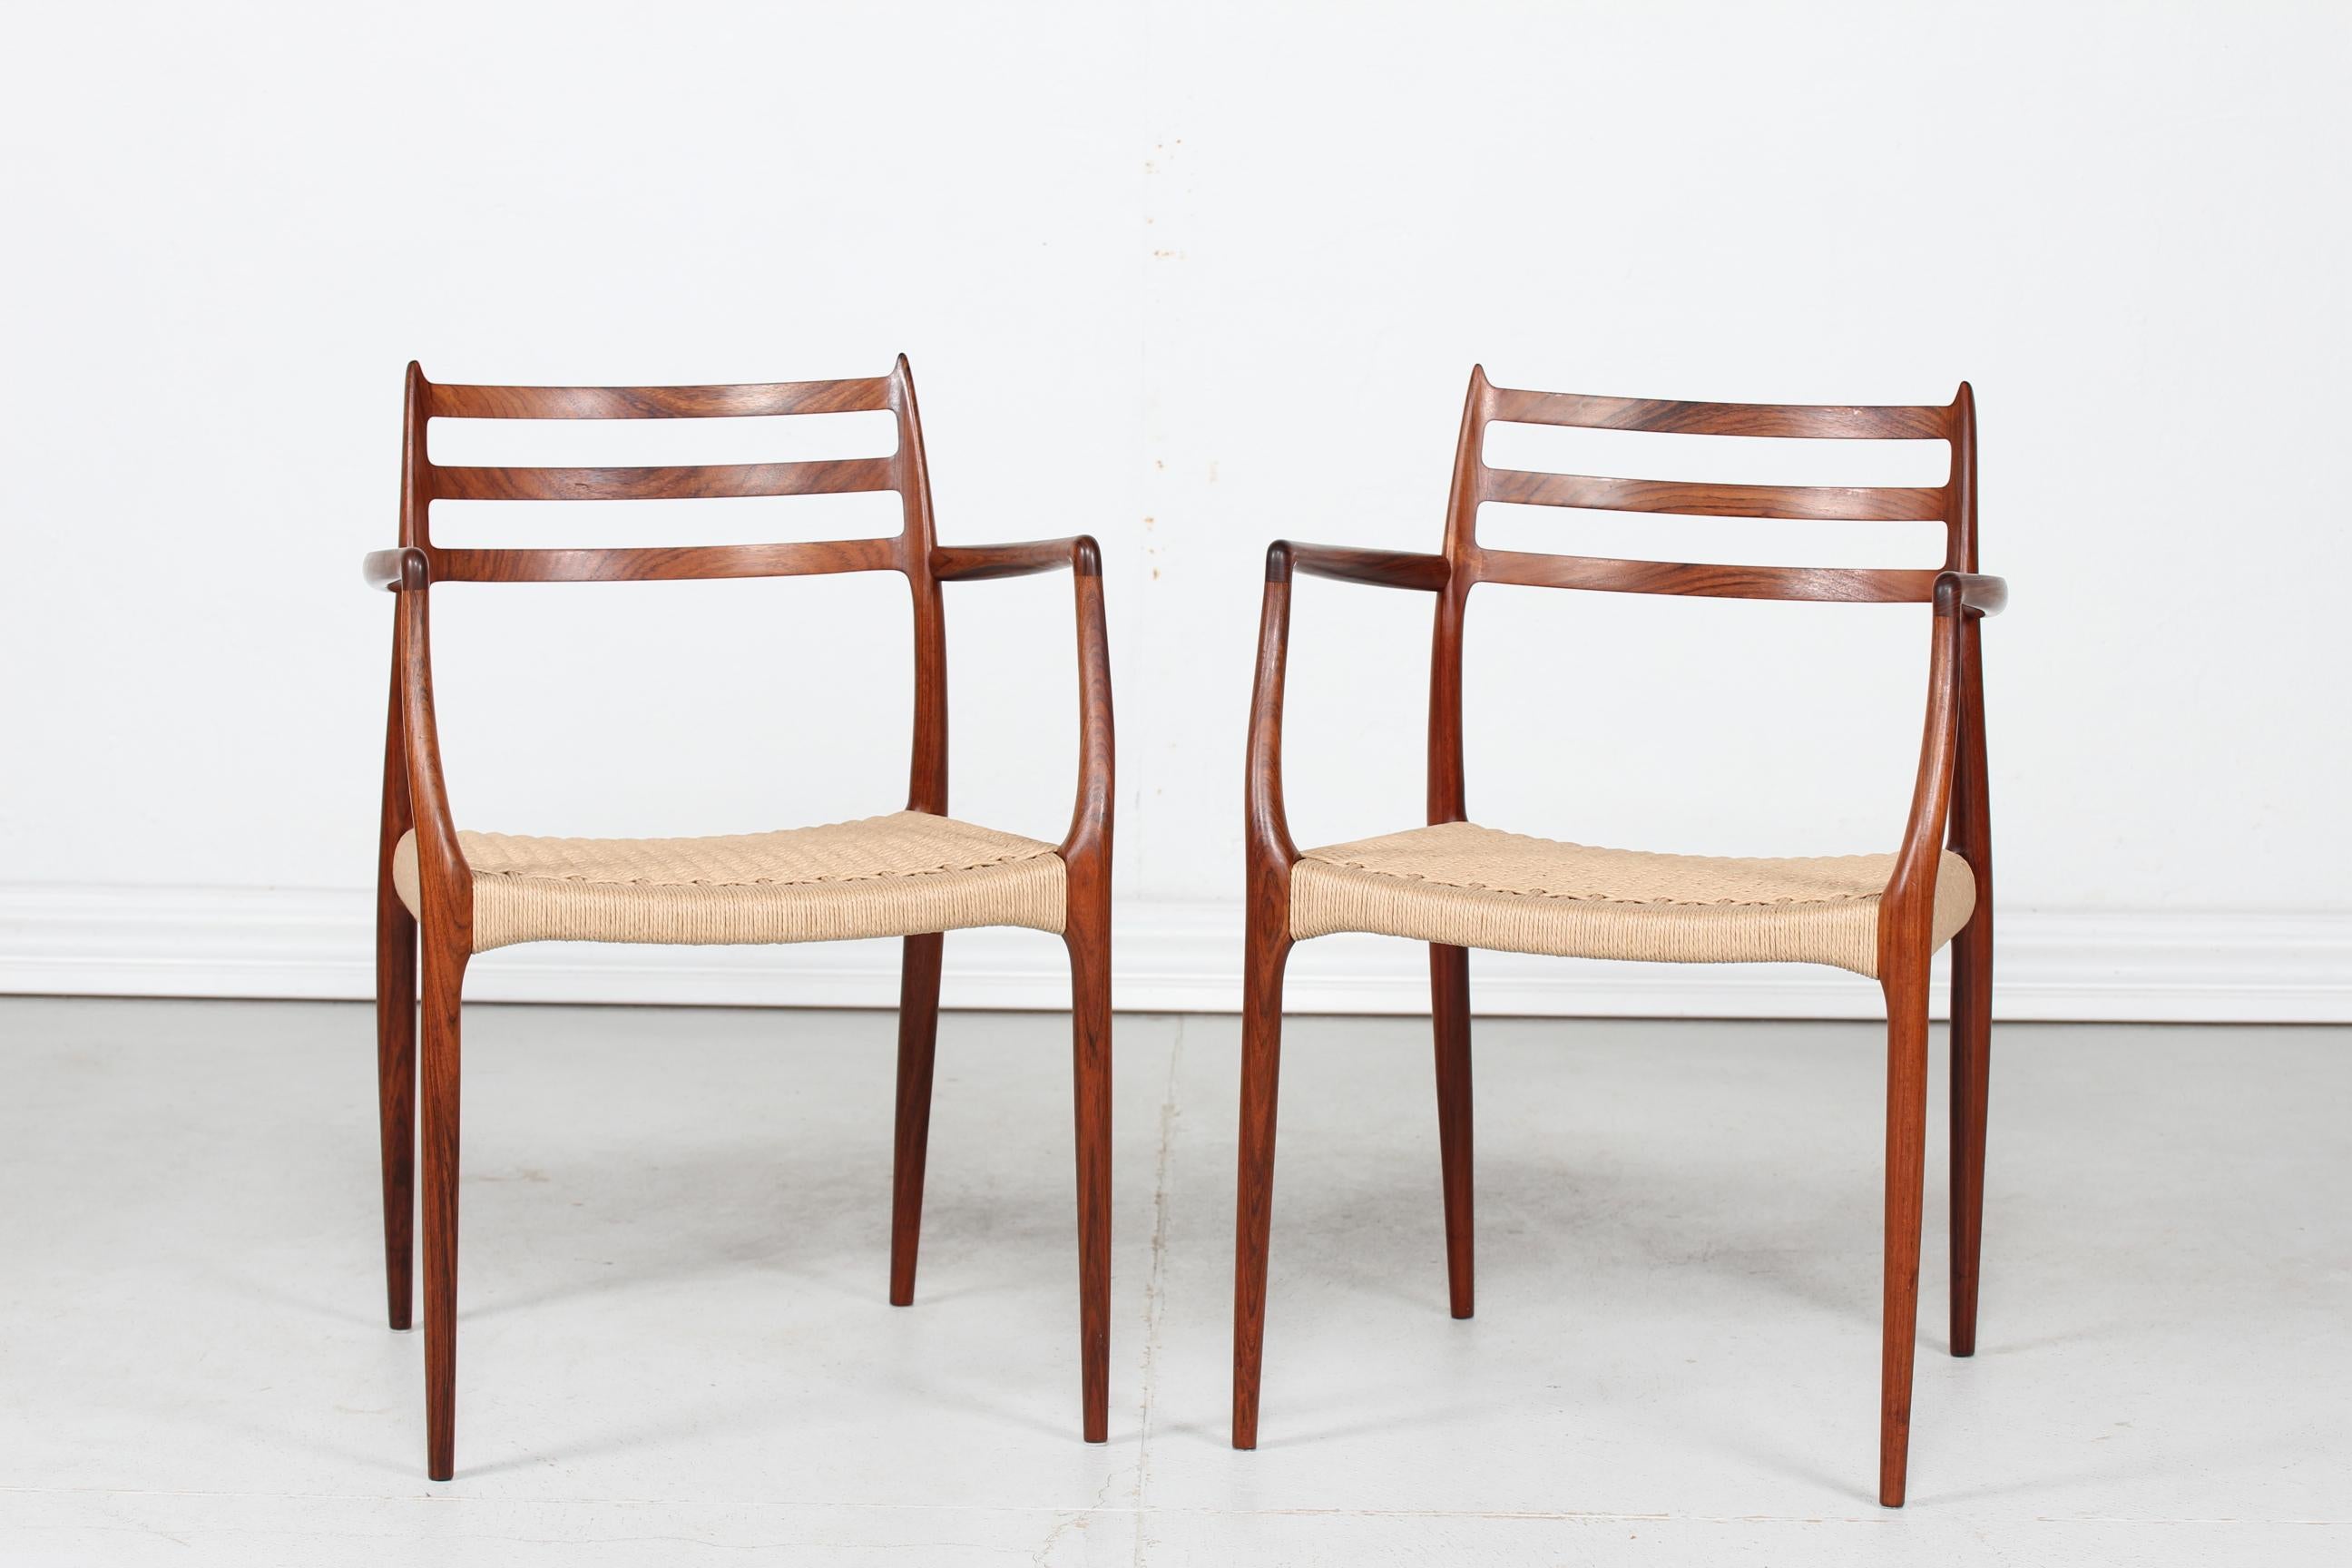 Here is a pair of armchairs model no. 62 designed by the Danish cabinet maker and furniture designer Niels Otto Møller (1920-1982) 
They are manufactured in the 1960s by J. L. Møllers Møbelfabrik, Aarhus in Denmark.

The rosewood armchairs have